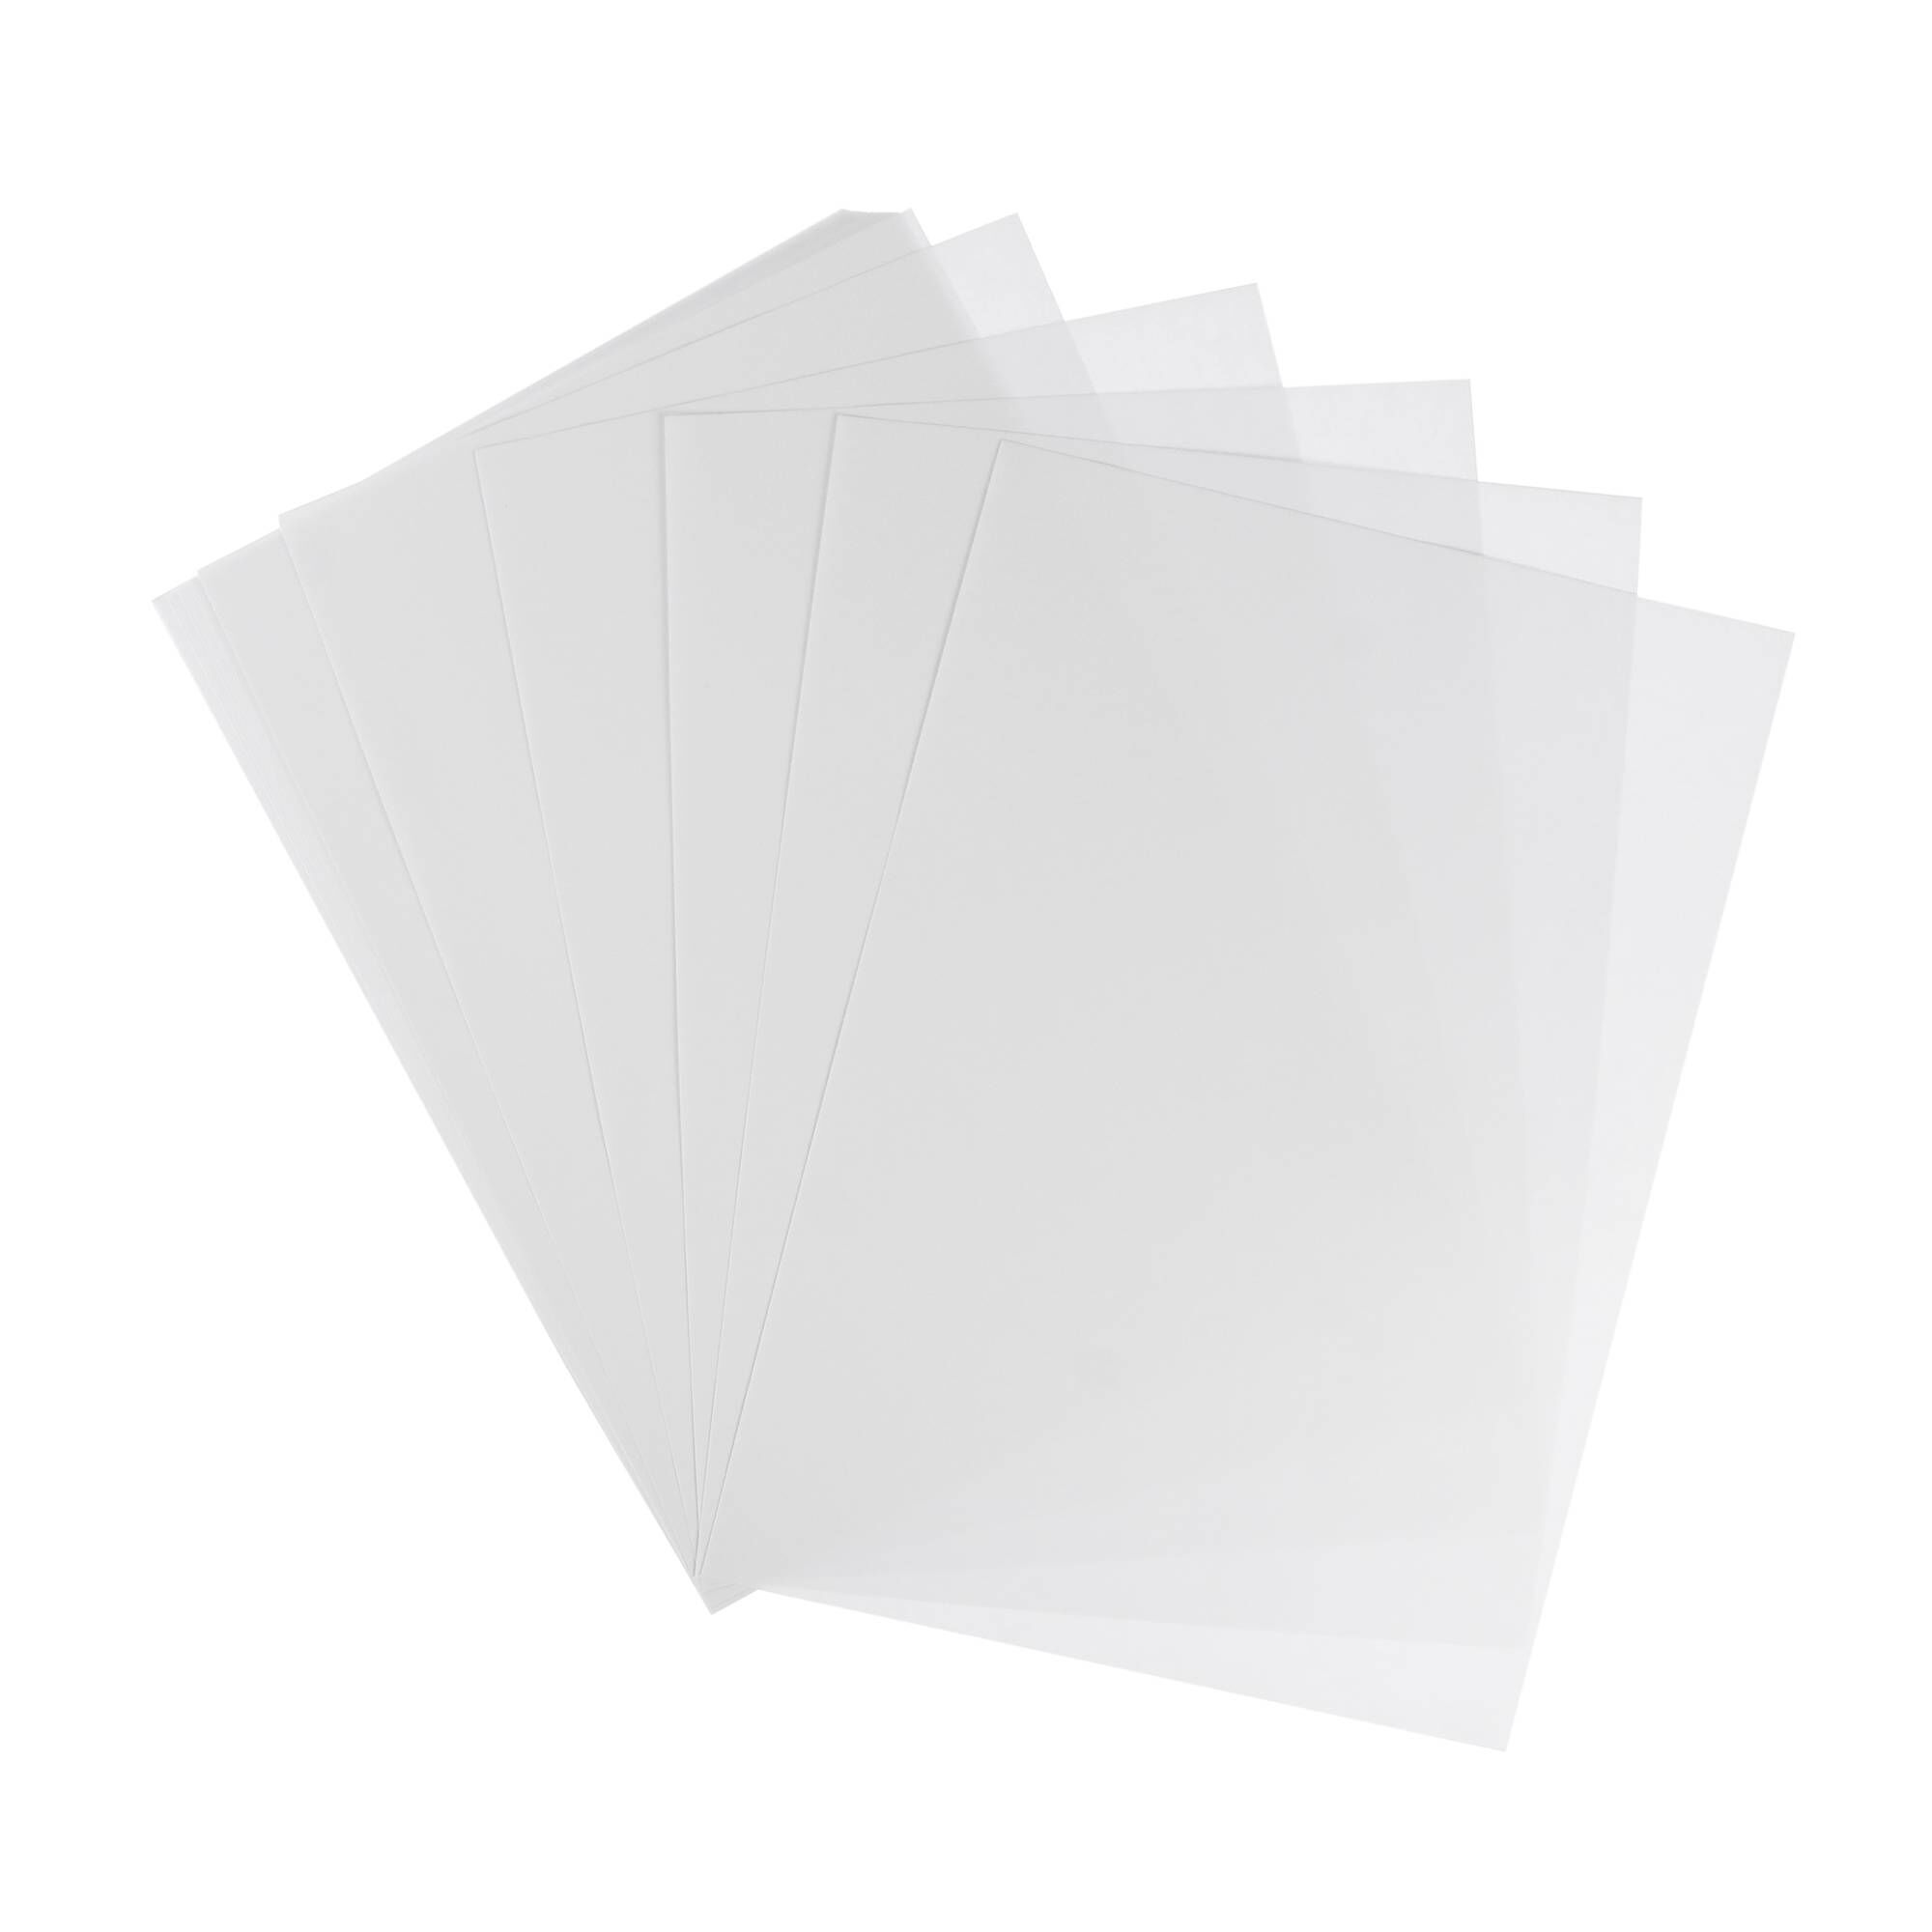 Colour It! A4 White Paper 40 Pack | Hobbycraft